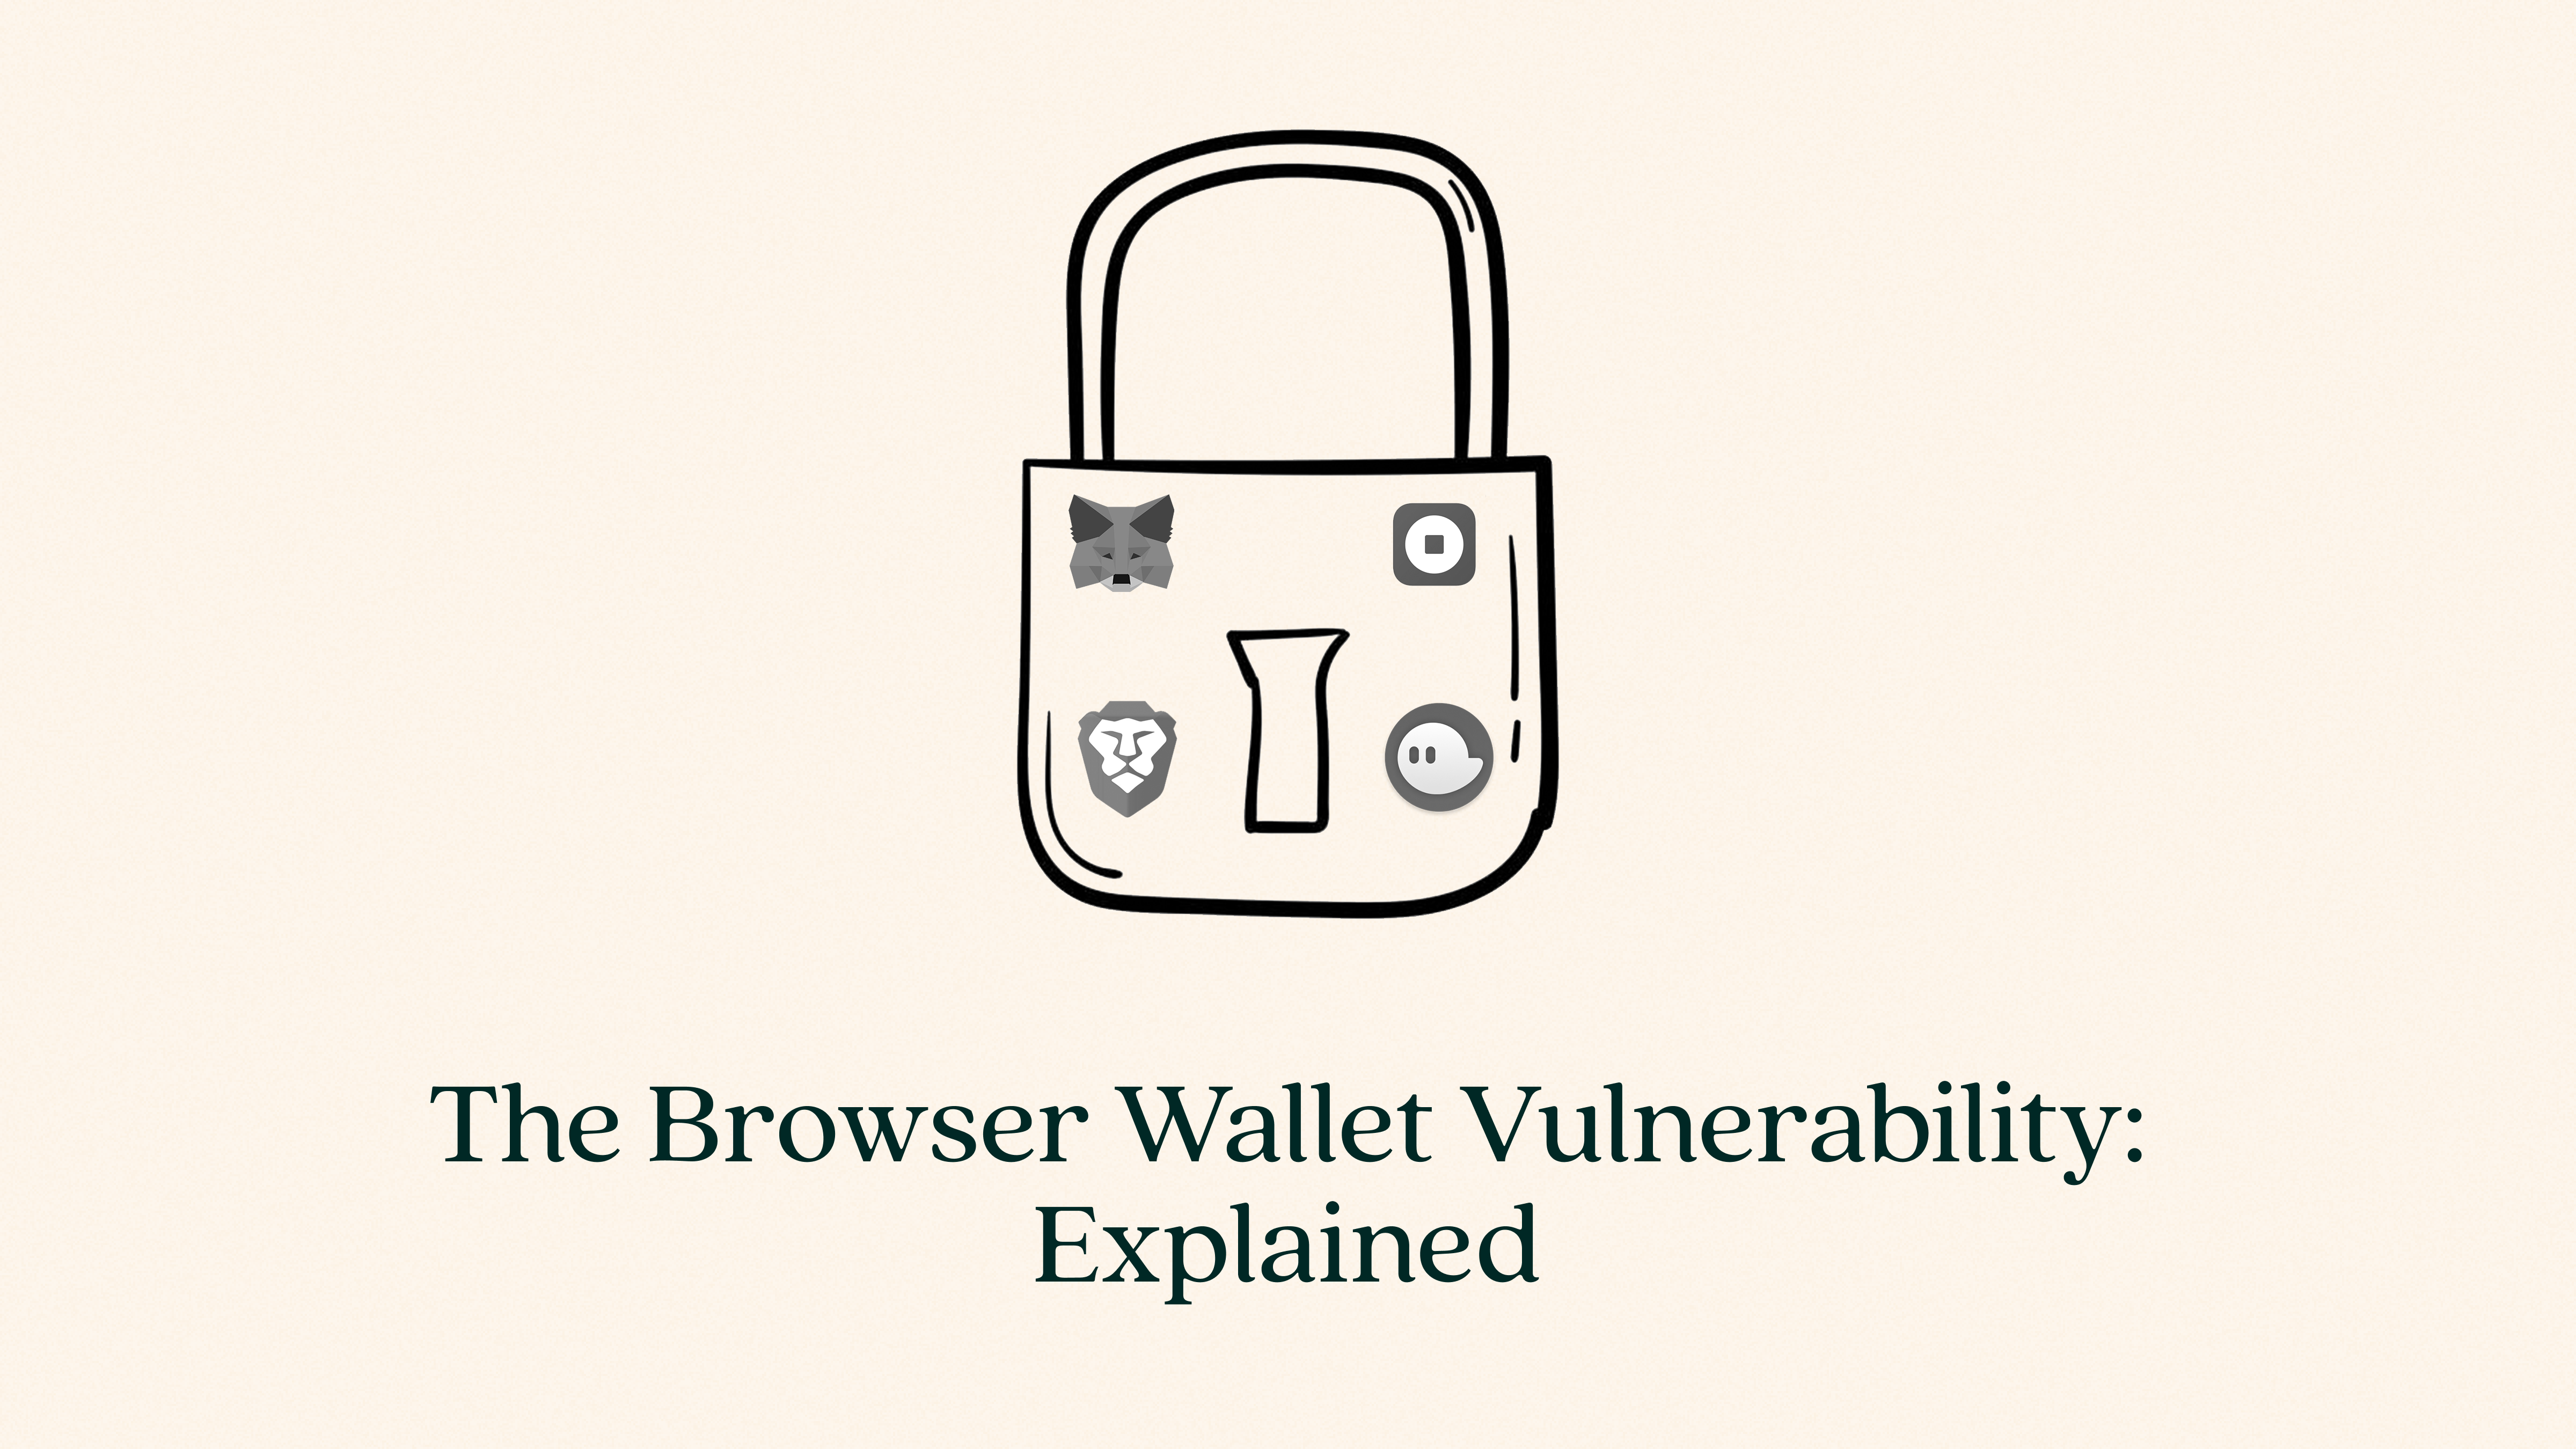 The Browser Wallet Vulnerability: Explained